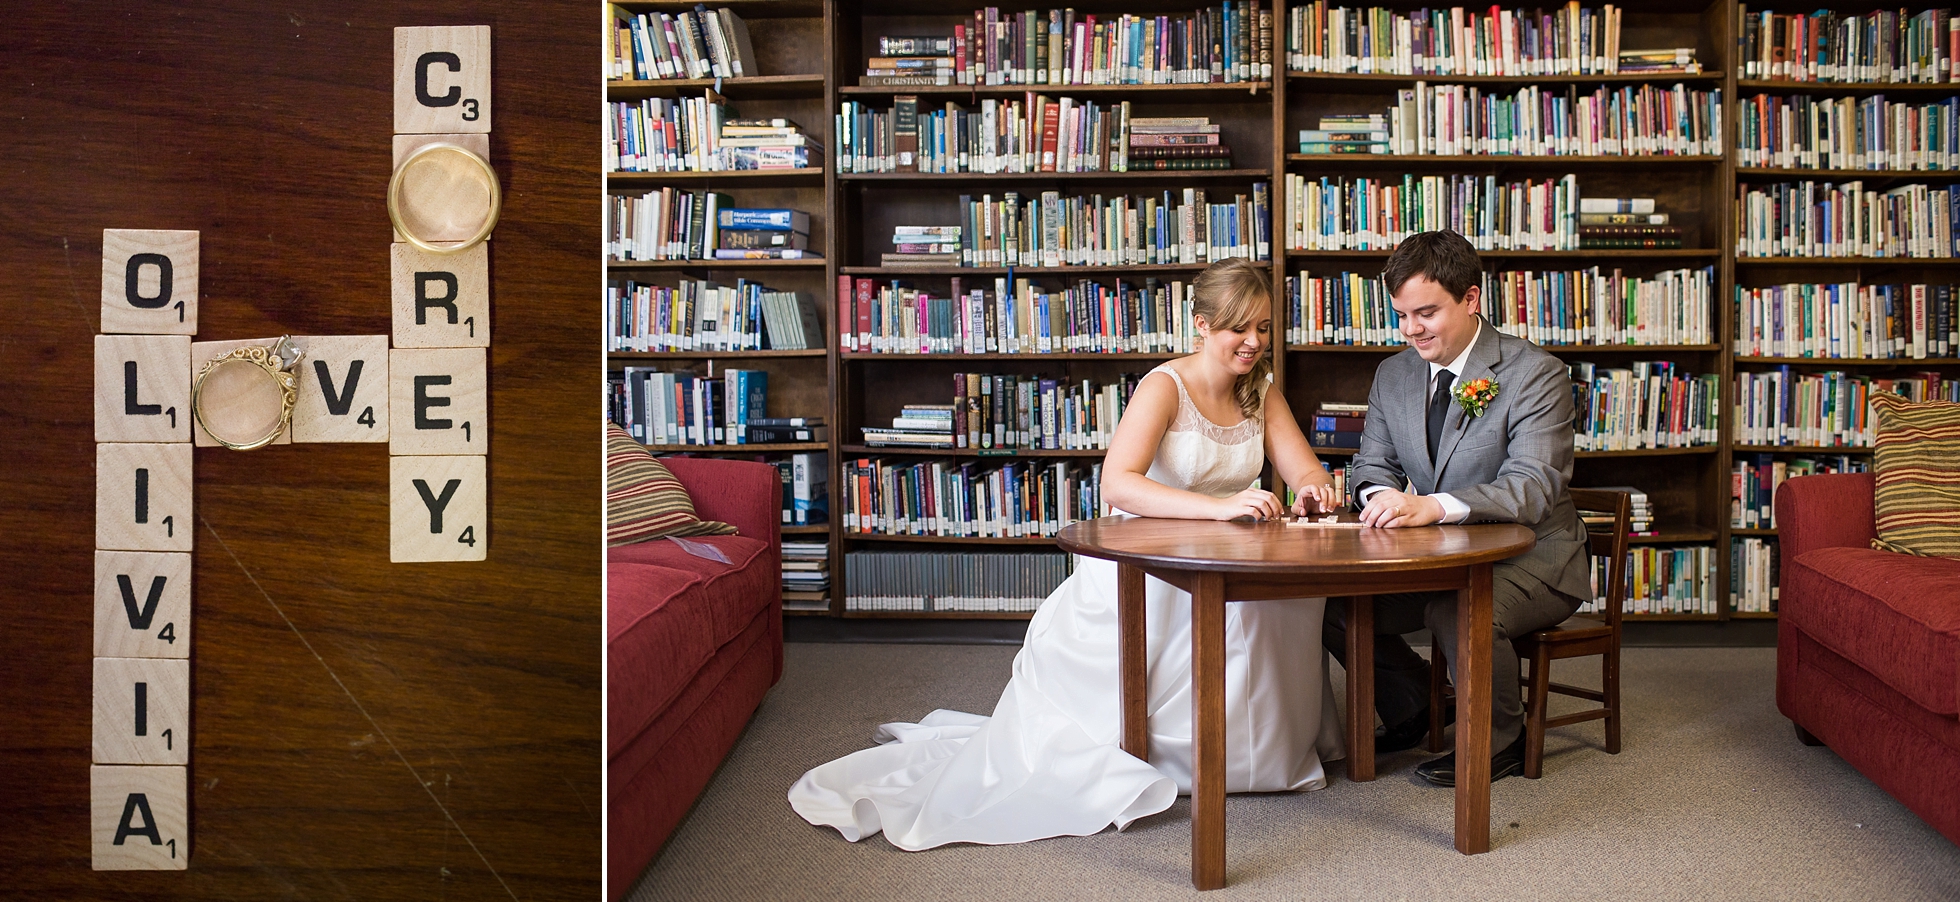 wedding library games